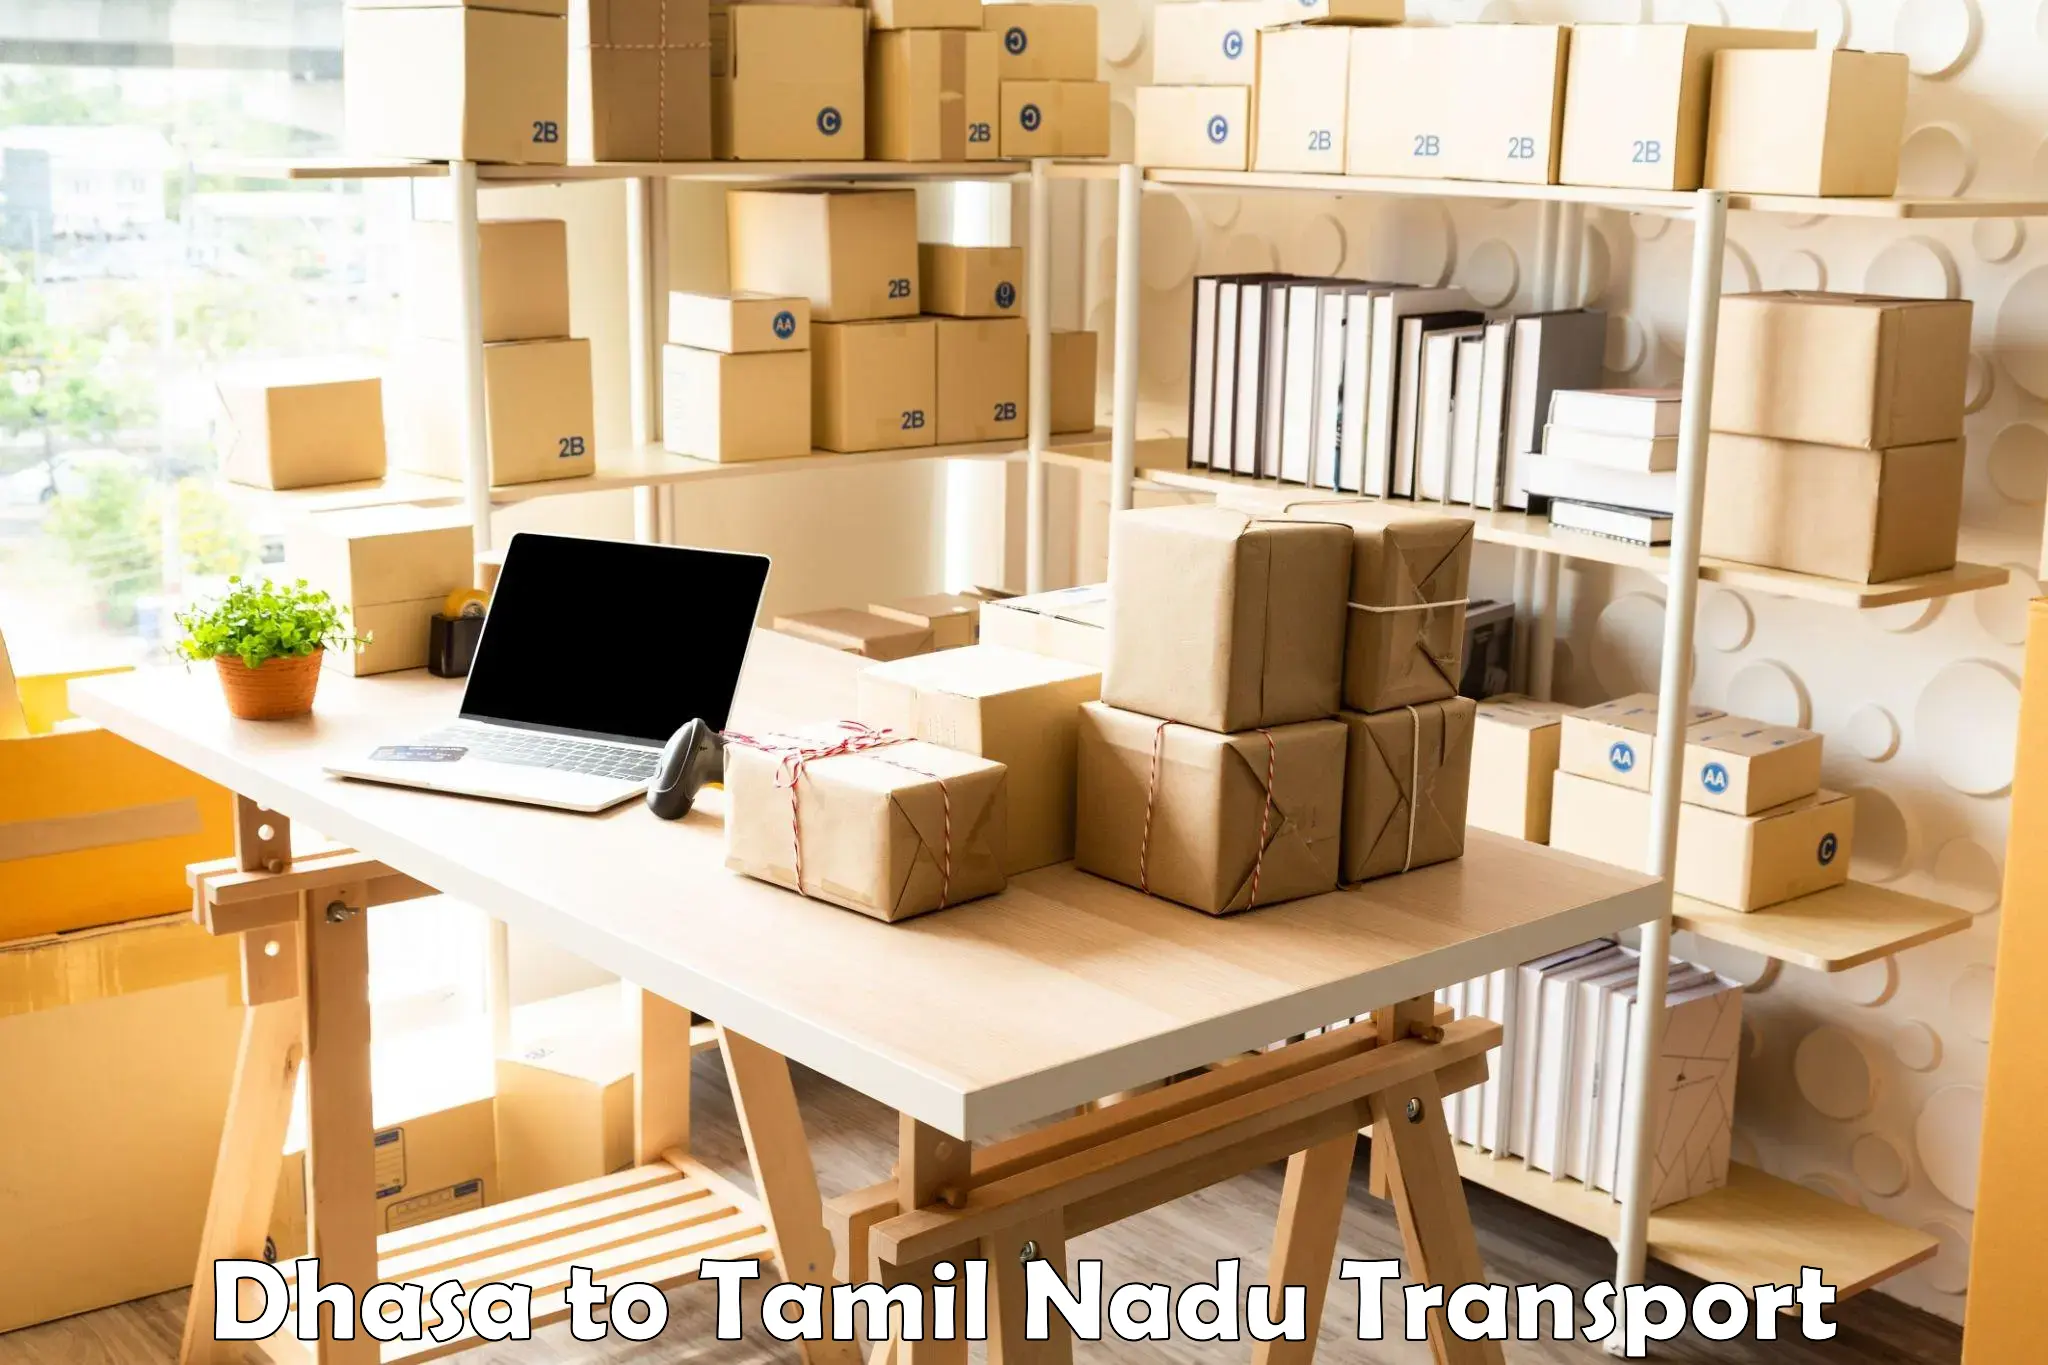 Domestic goods transportation services Dhasa to Coimbatore